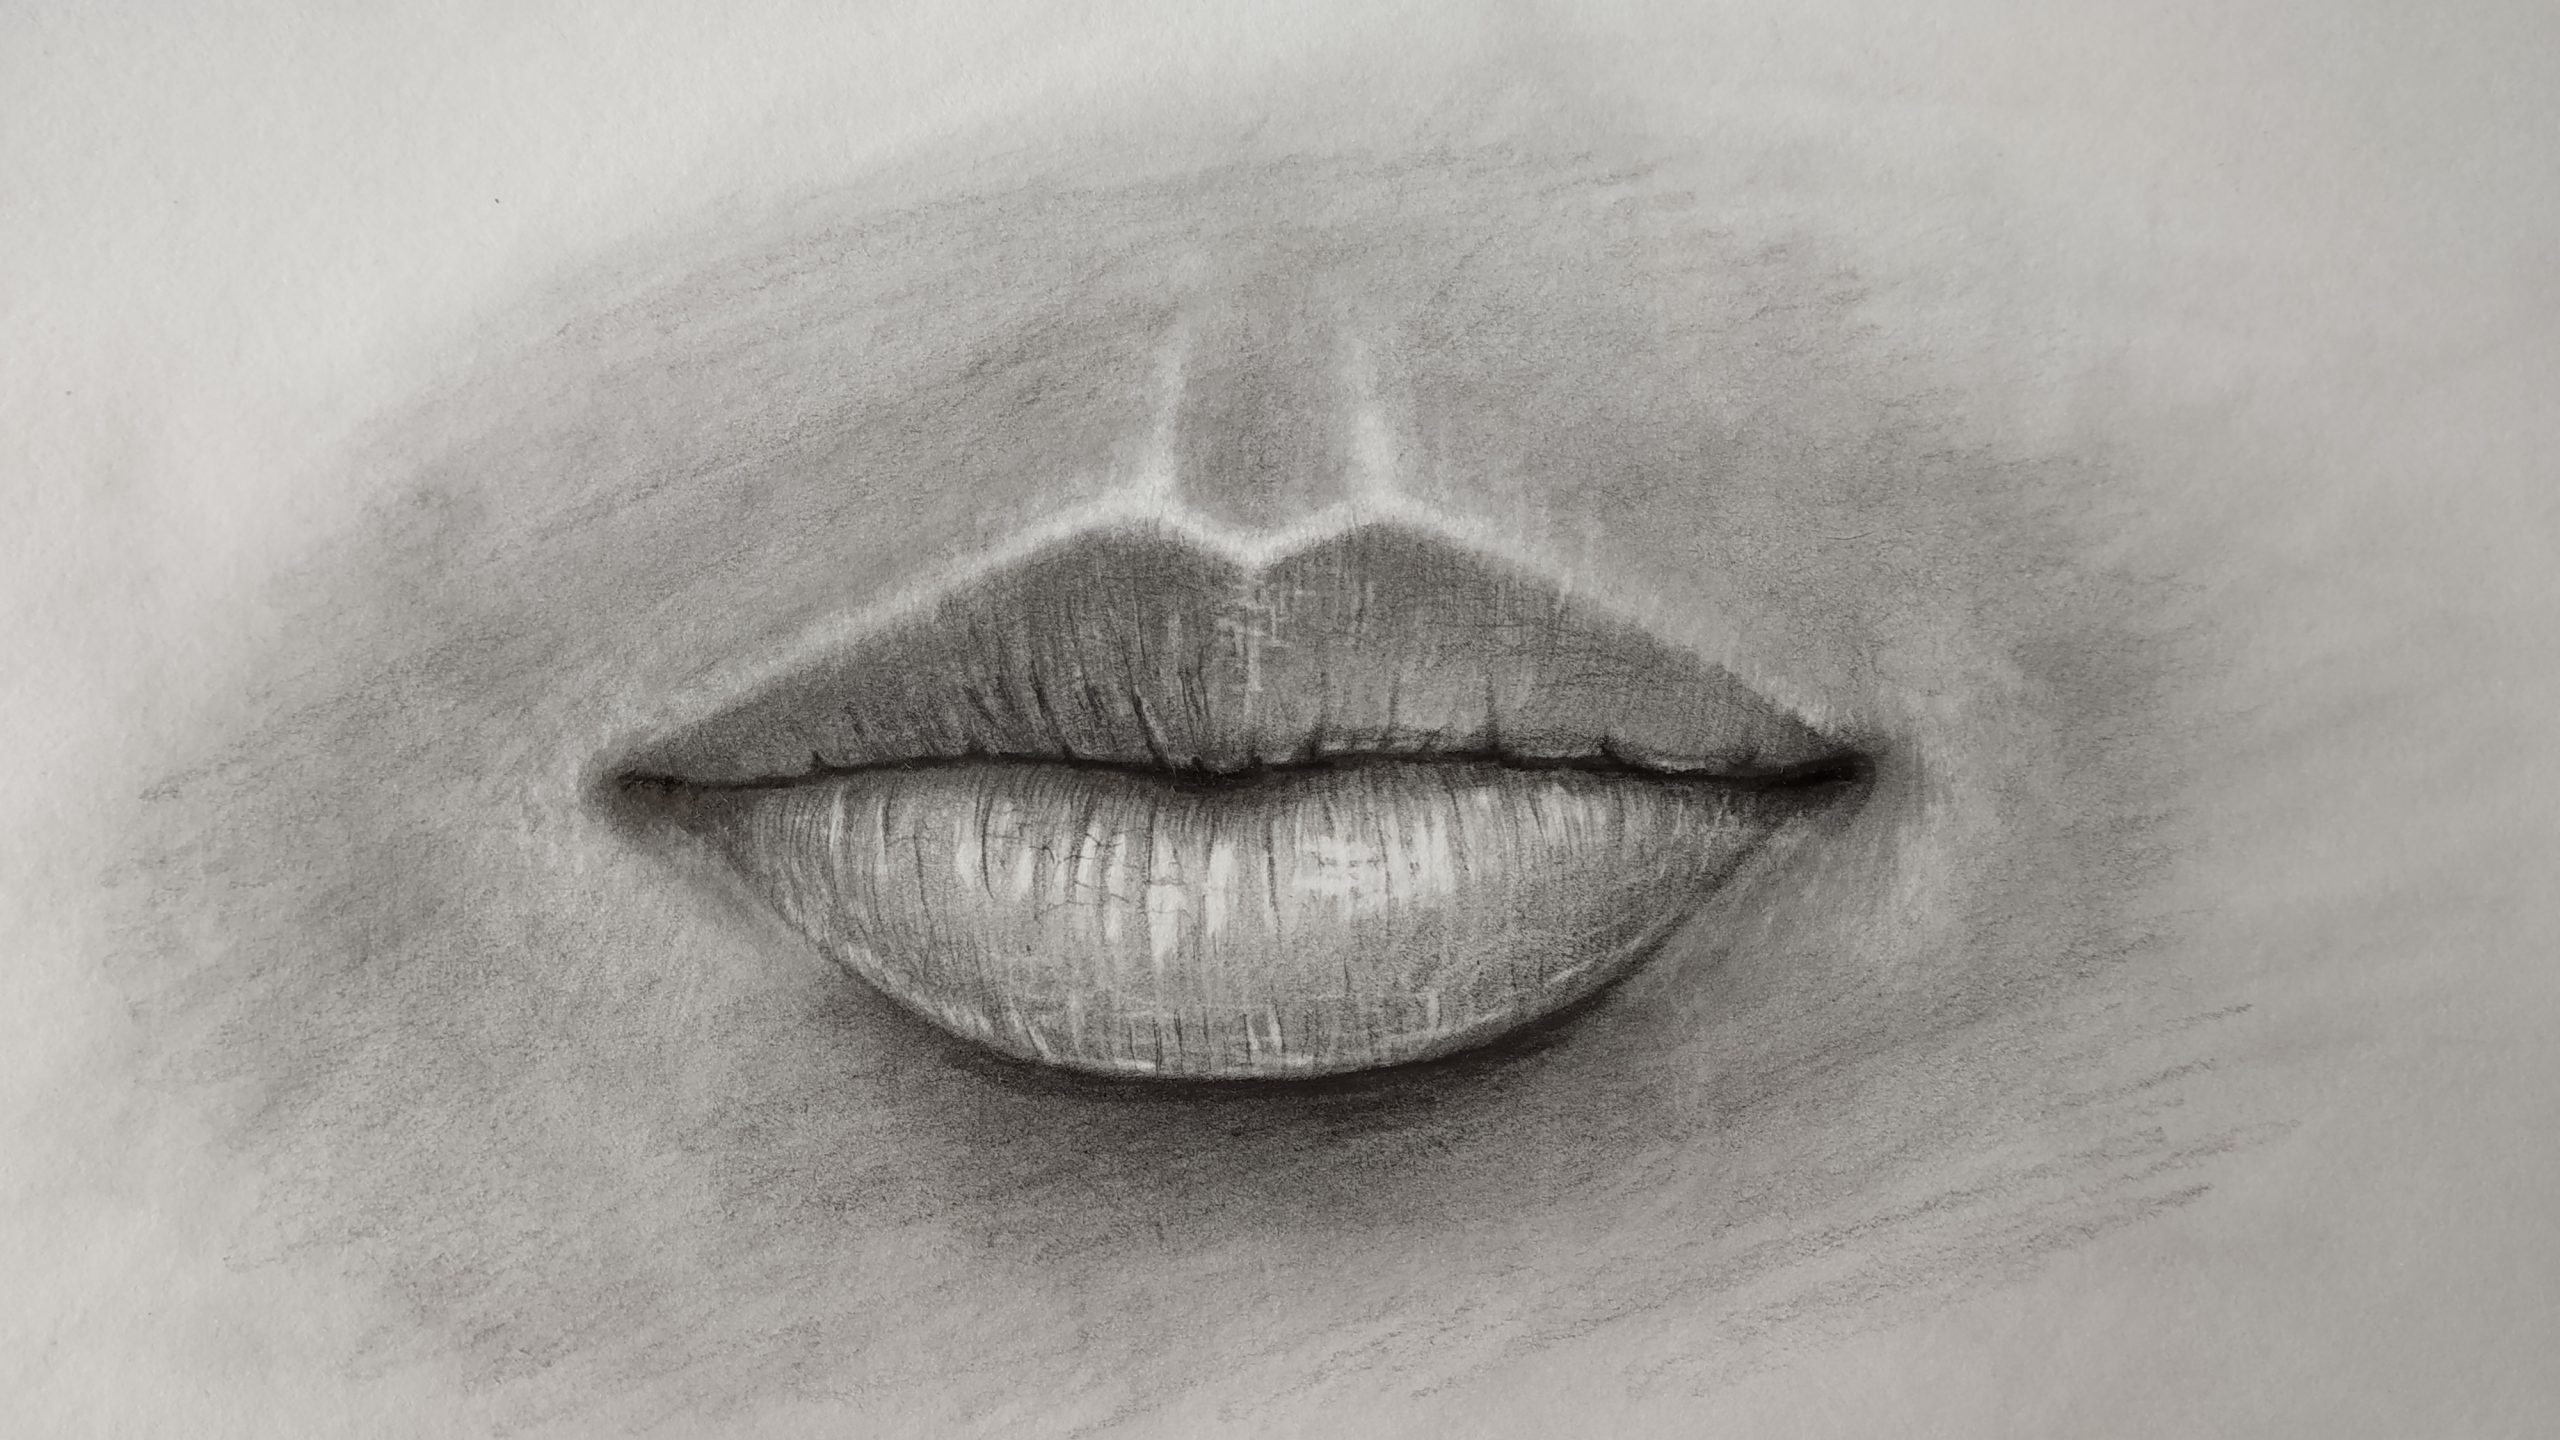 How To Draw Lipsfront View Lov4arts Lip Drawing